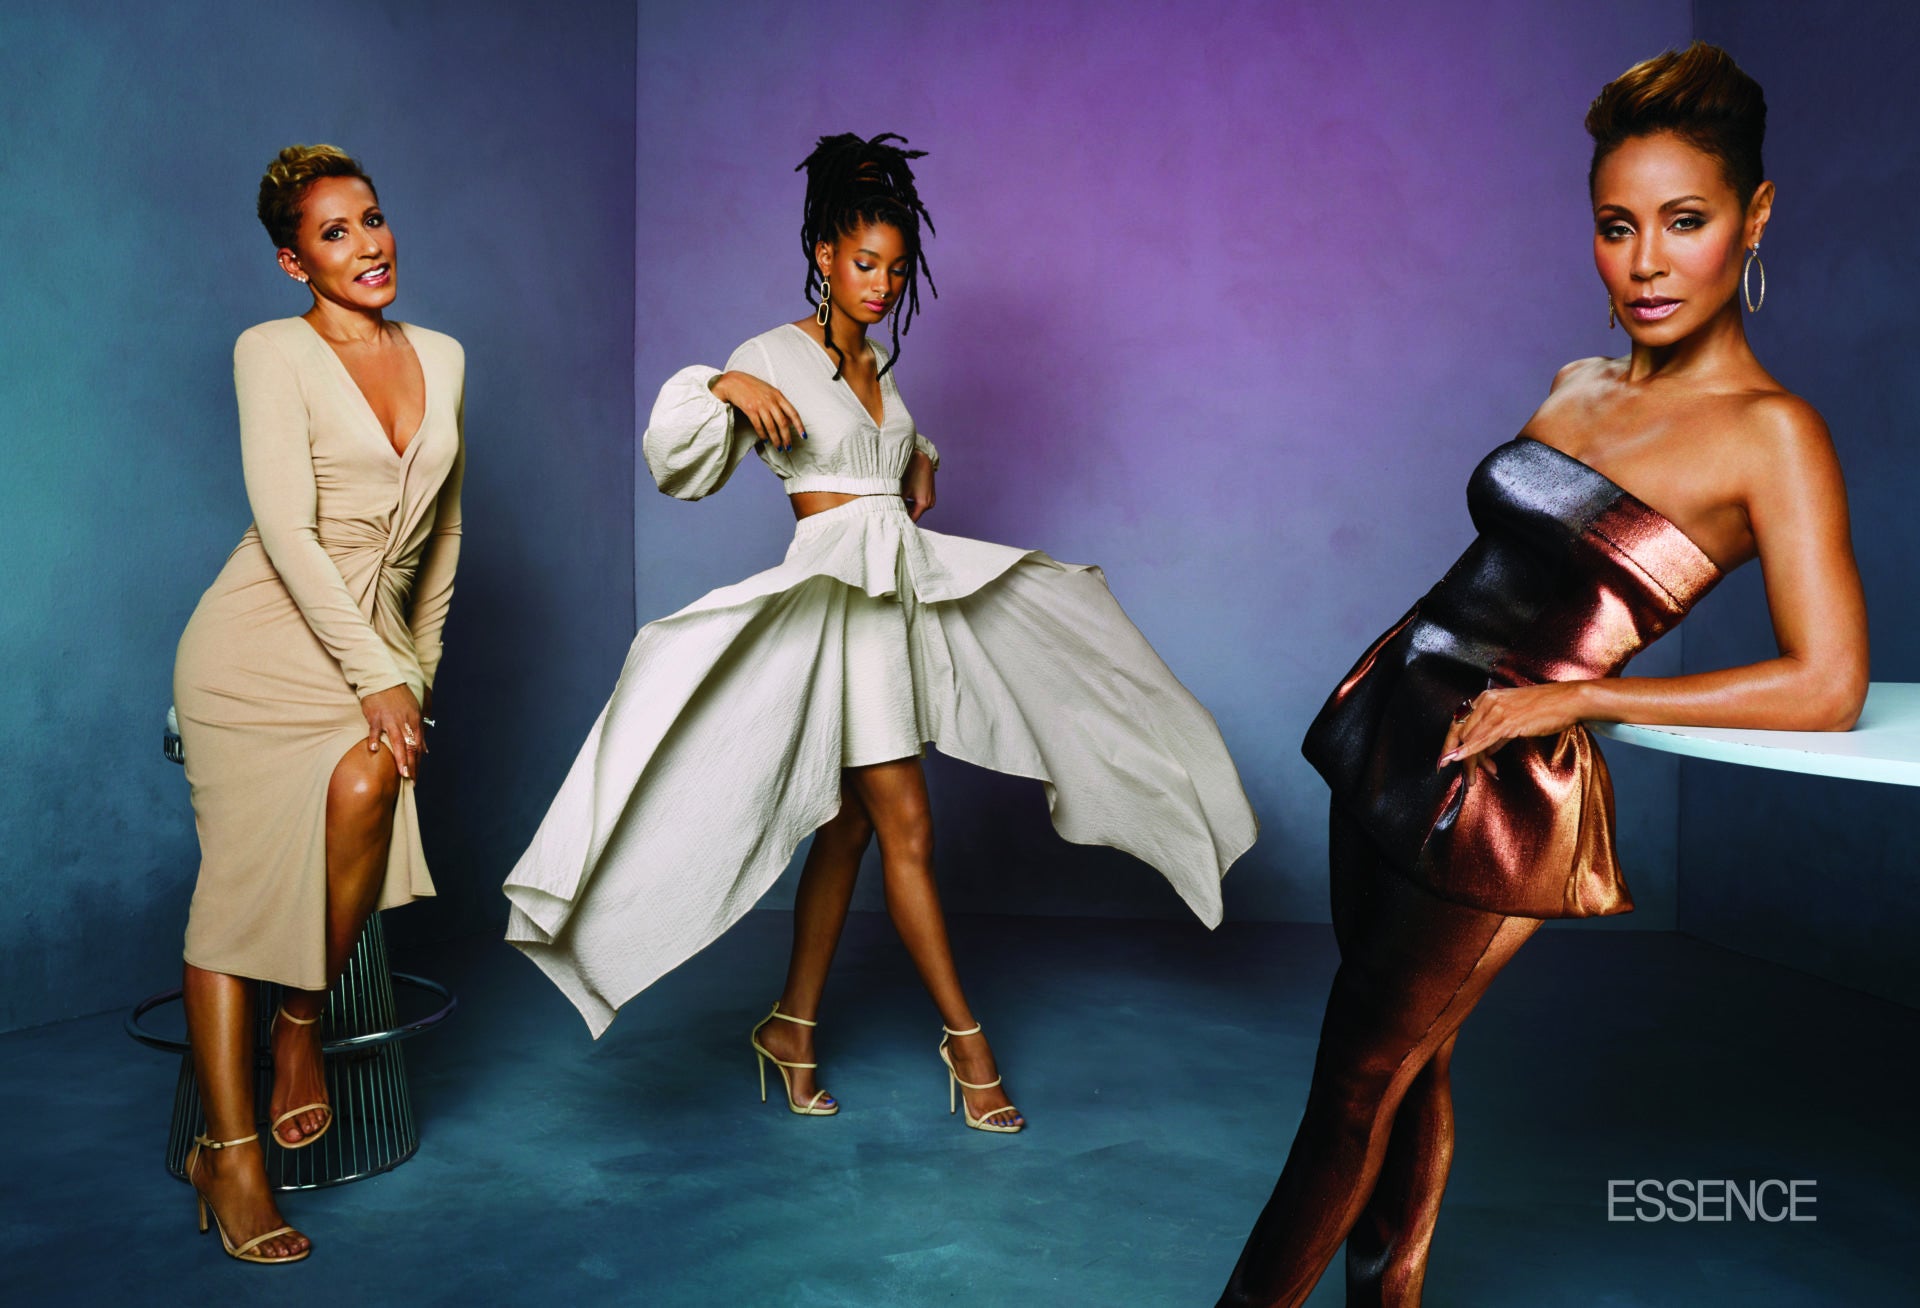 How Jada Pinkett Smith, Willow Smith And Adrienne Banfield-Norris Reinvented The Talk Show